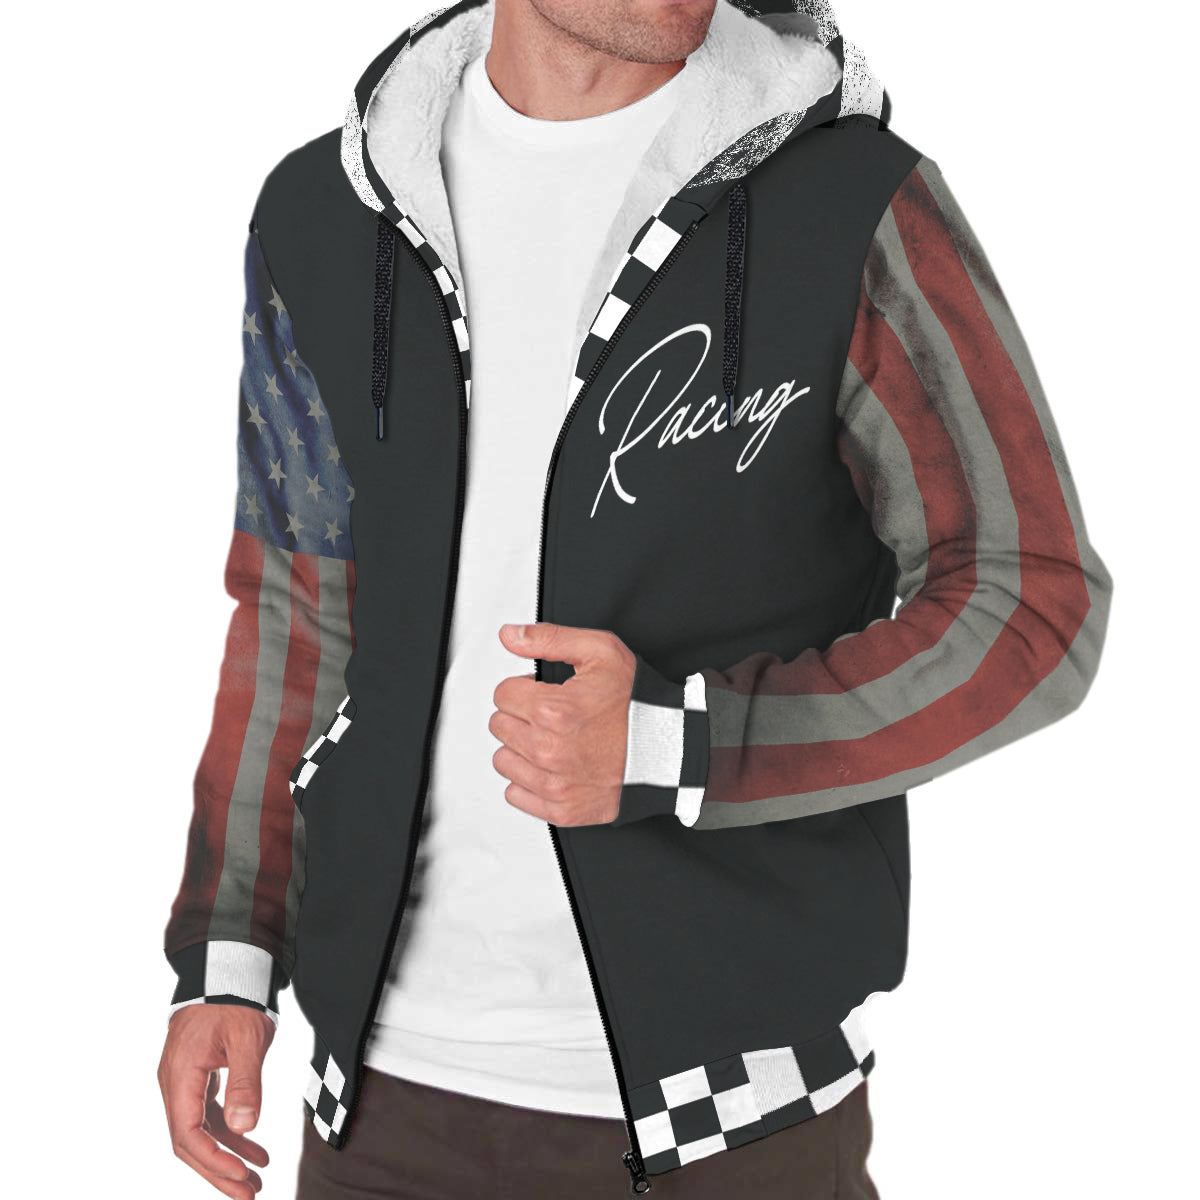 I Just Want To Go Racing and forget the rest of my adult problems USA Sherpa Jacket